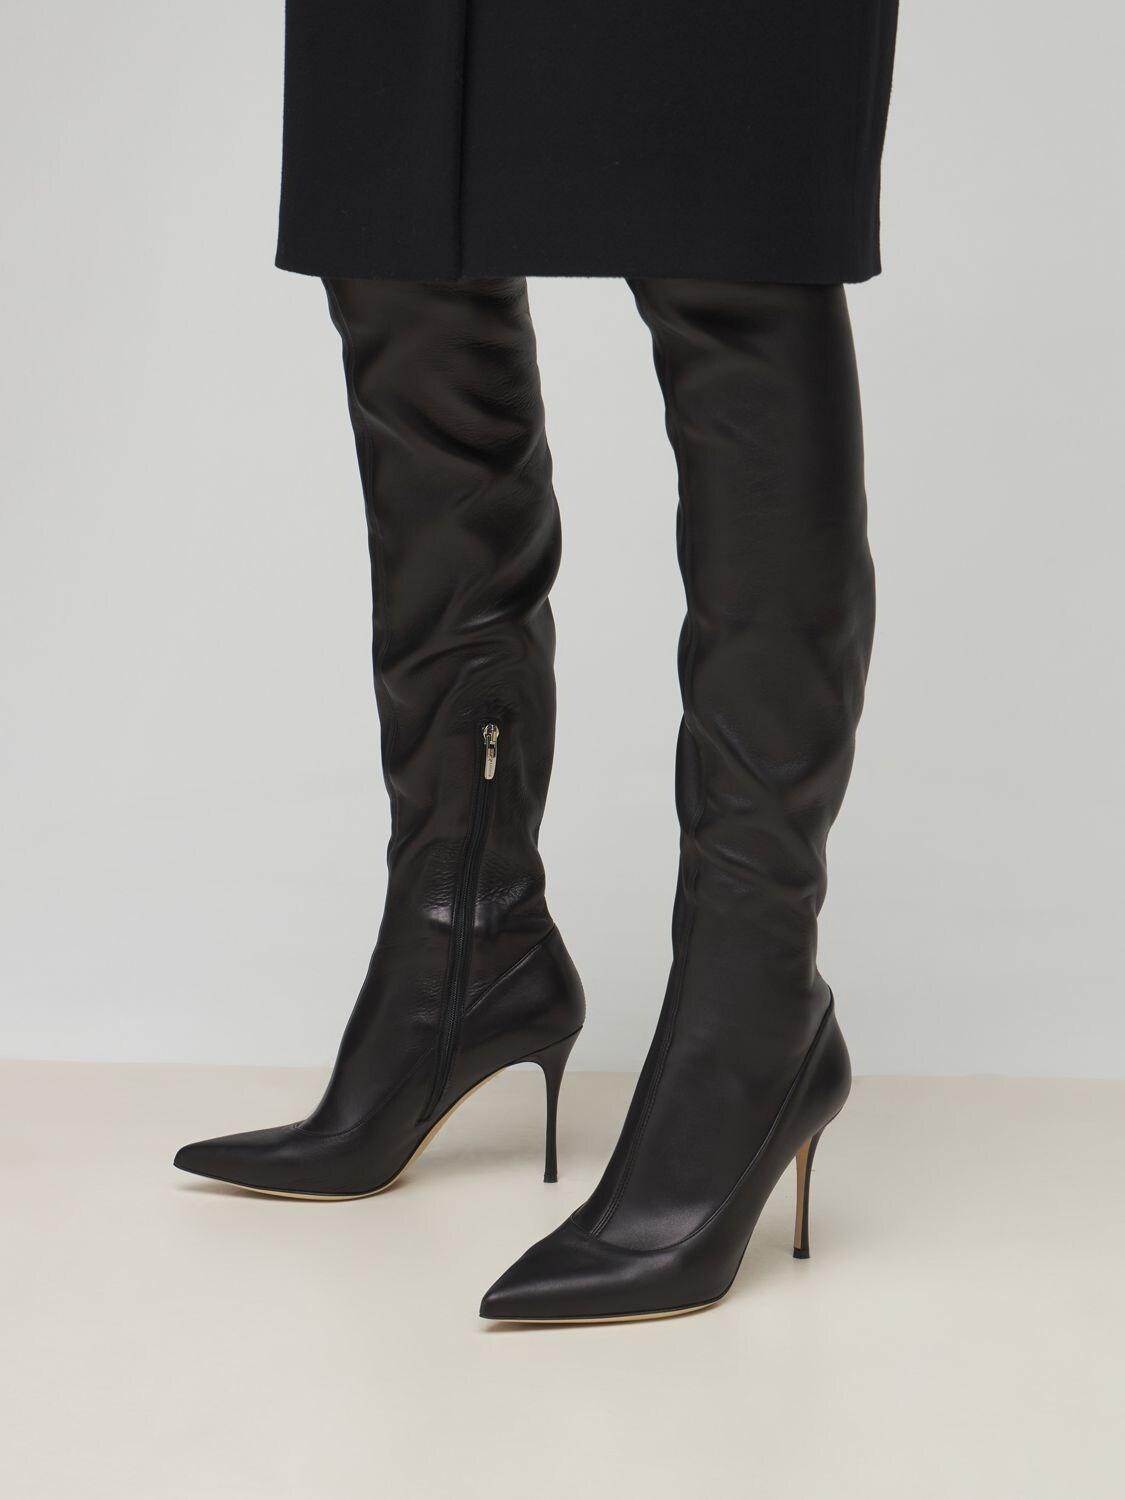 Sergio Rossi 90mm Stretch Leather Over-the-knee Boots in Black | Lyst